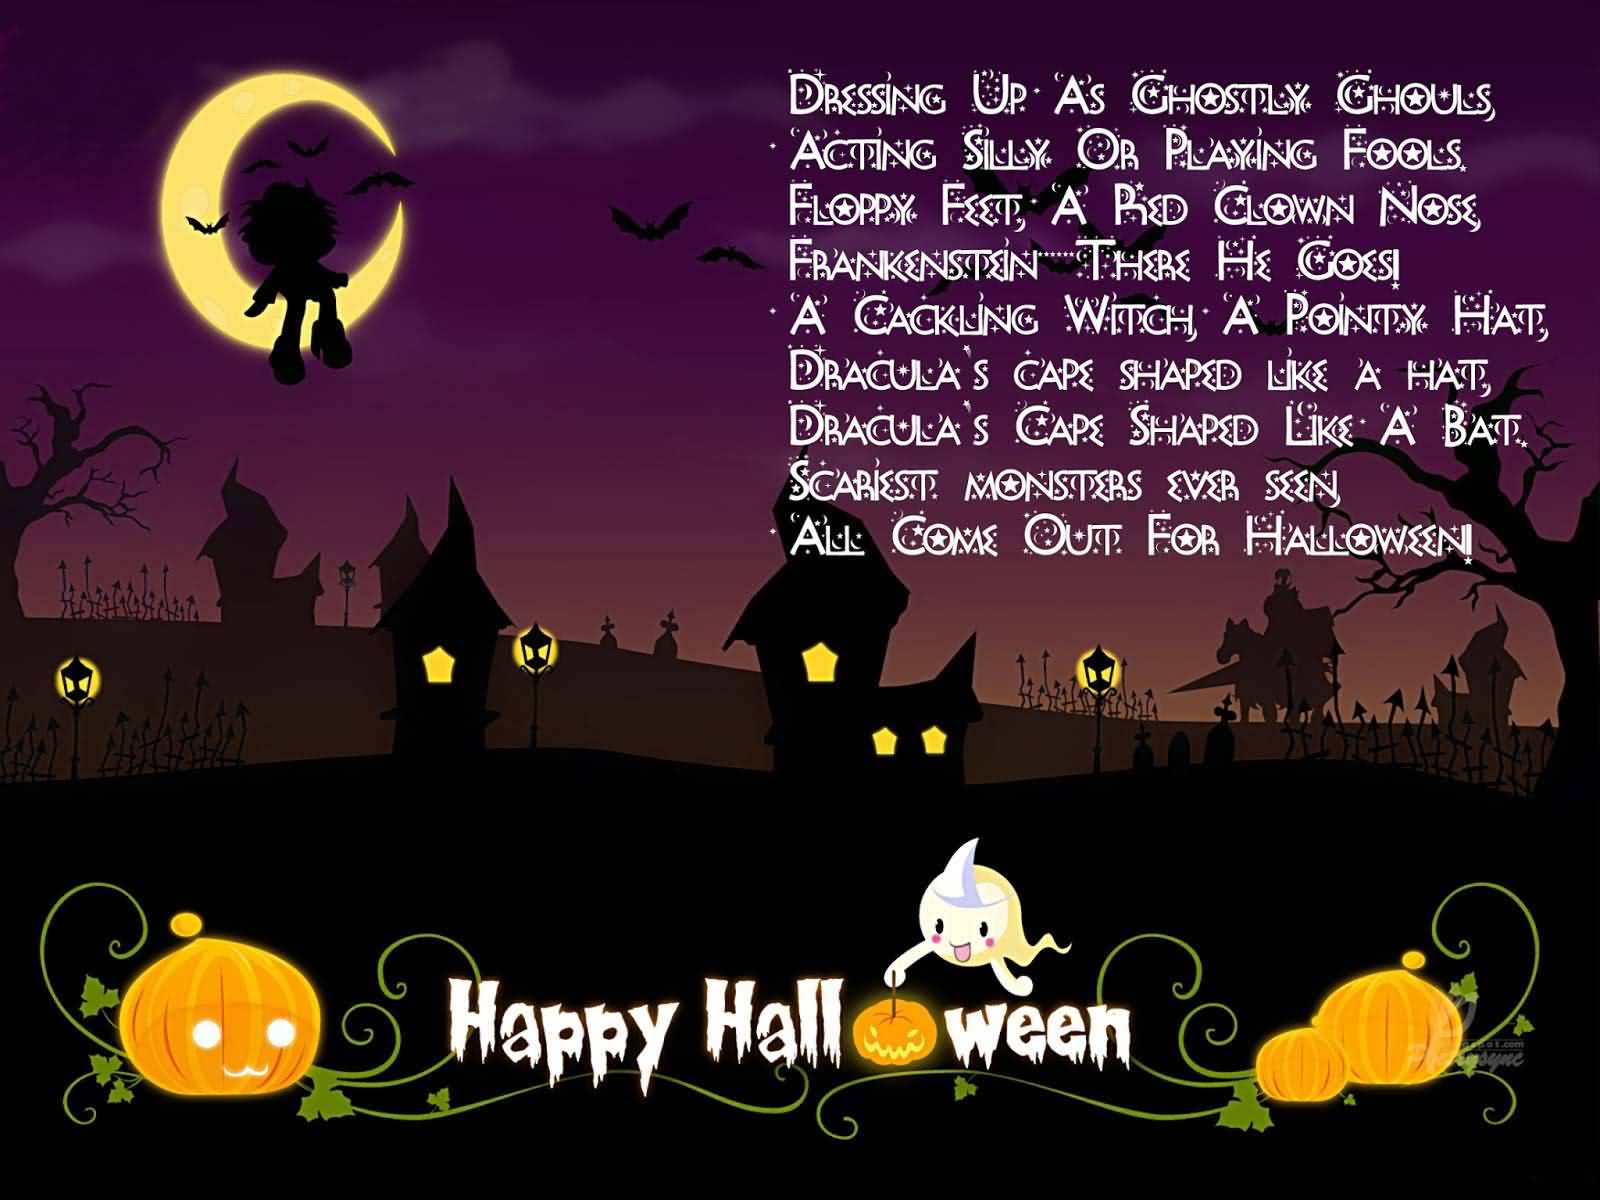 Dressing Up As Ghostly Ghouls Acting Silly Or Playing Fools Floppy Feet Happy Halloween